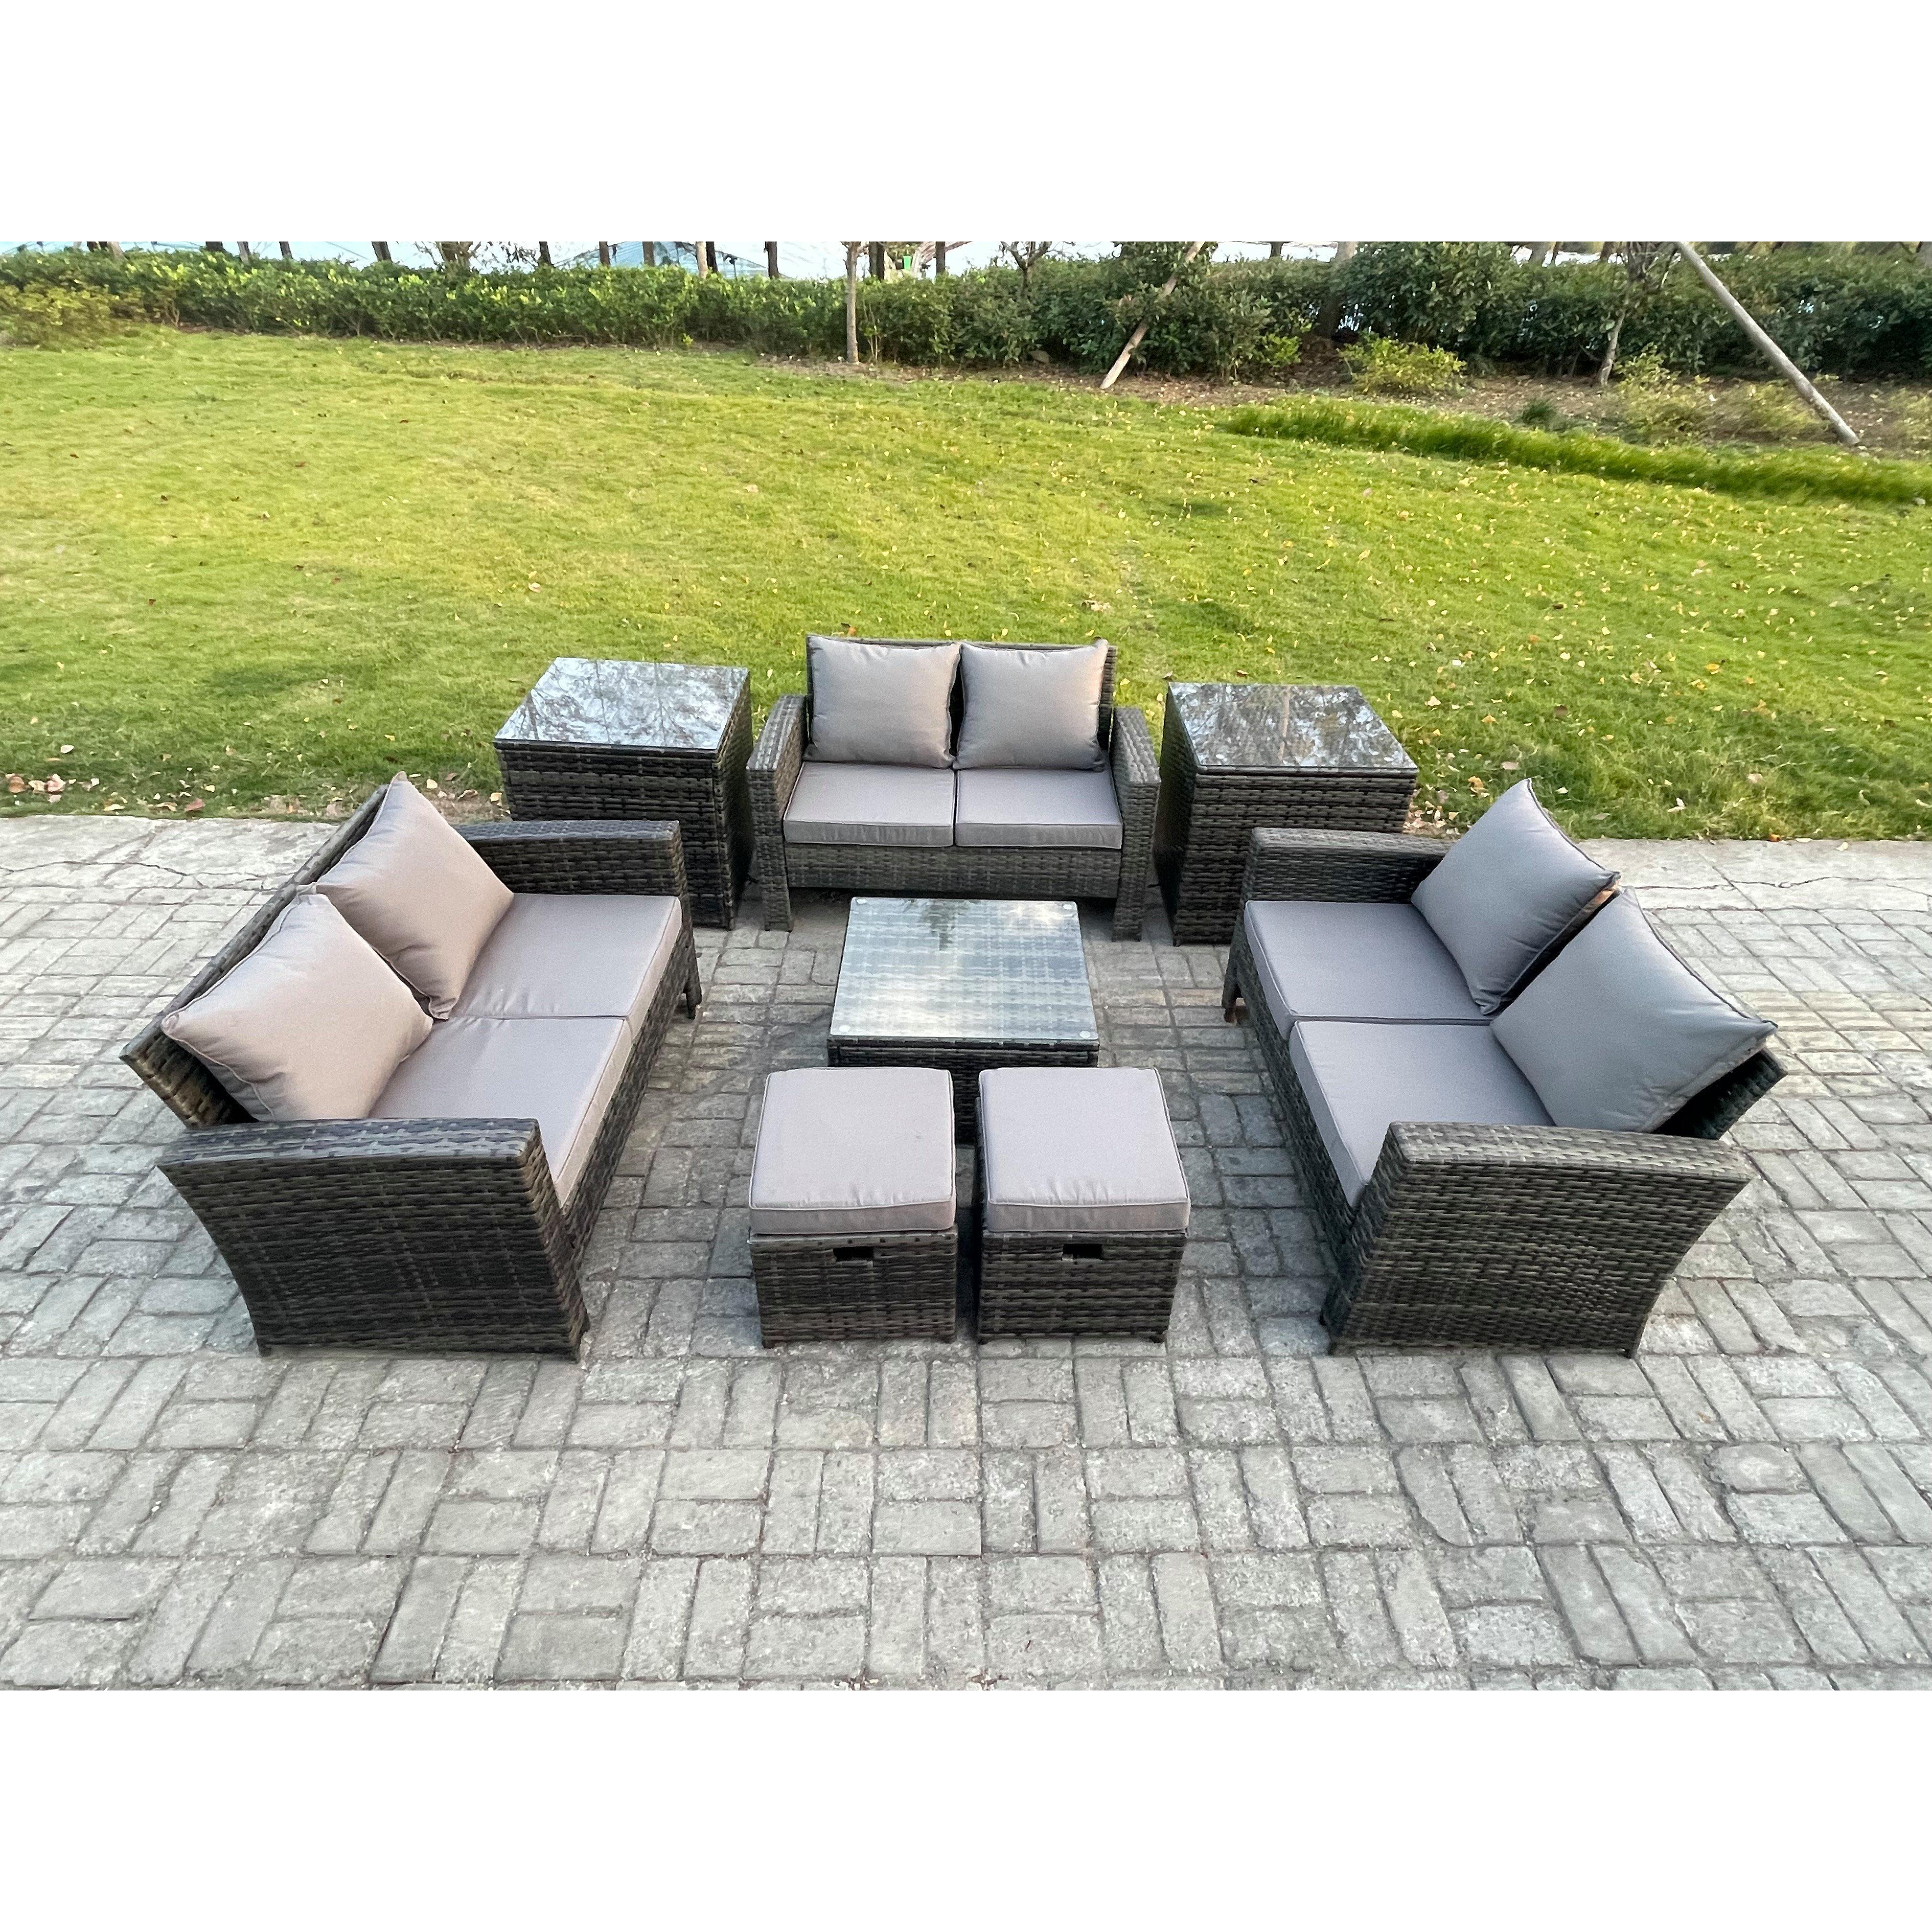 Outdoor Lounge Sofa Set Wicker PE Rattan Garden Furniture Set with Square Coffee Table Double Seat Sofa 2 Small Footstools - image 1